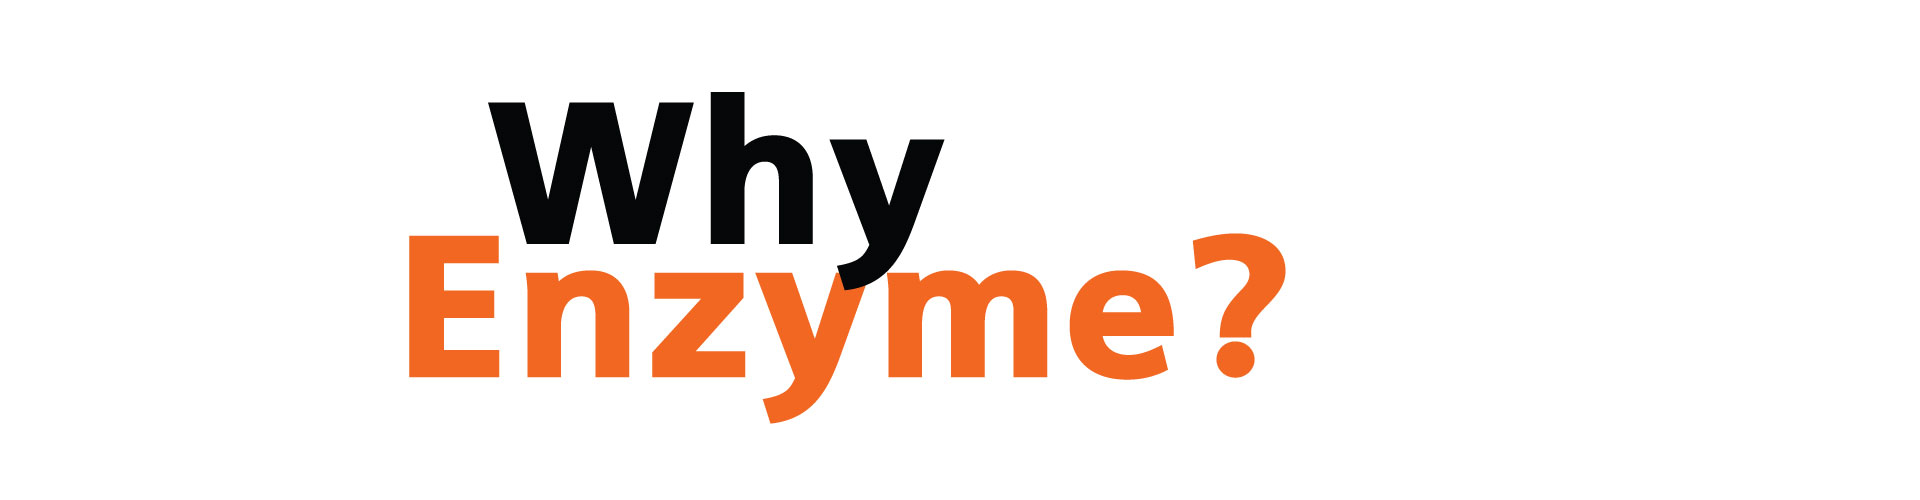 why enzyme